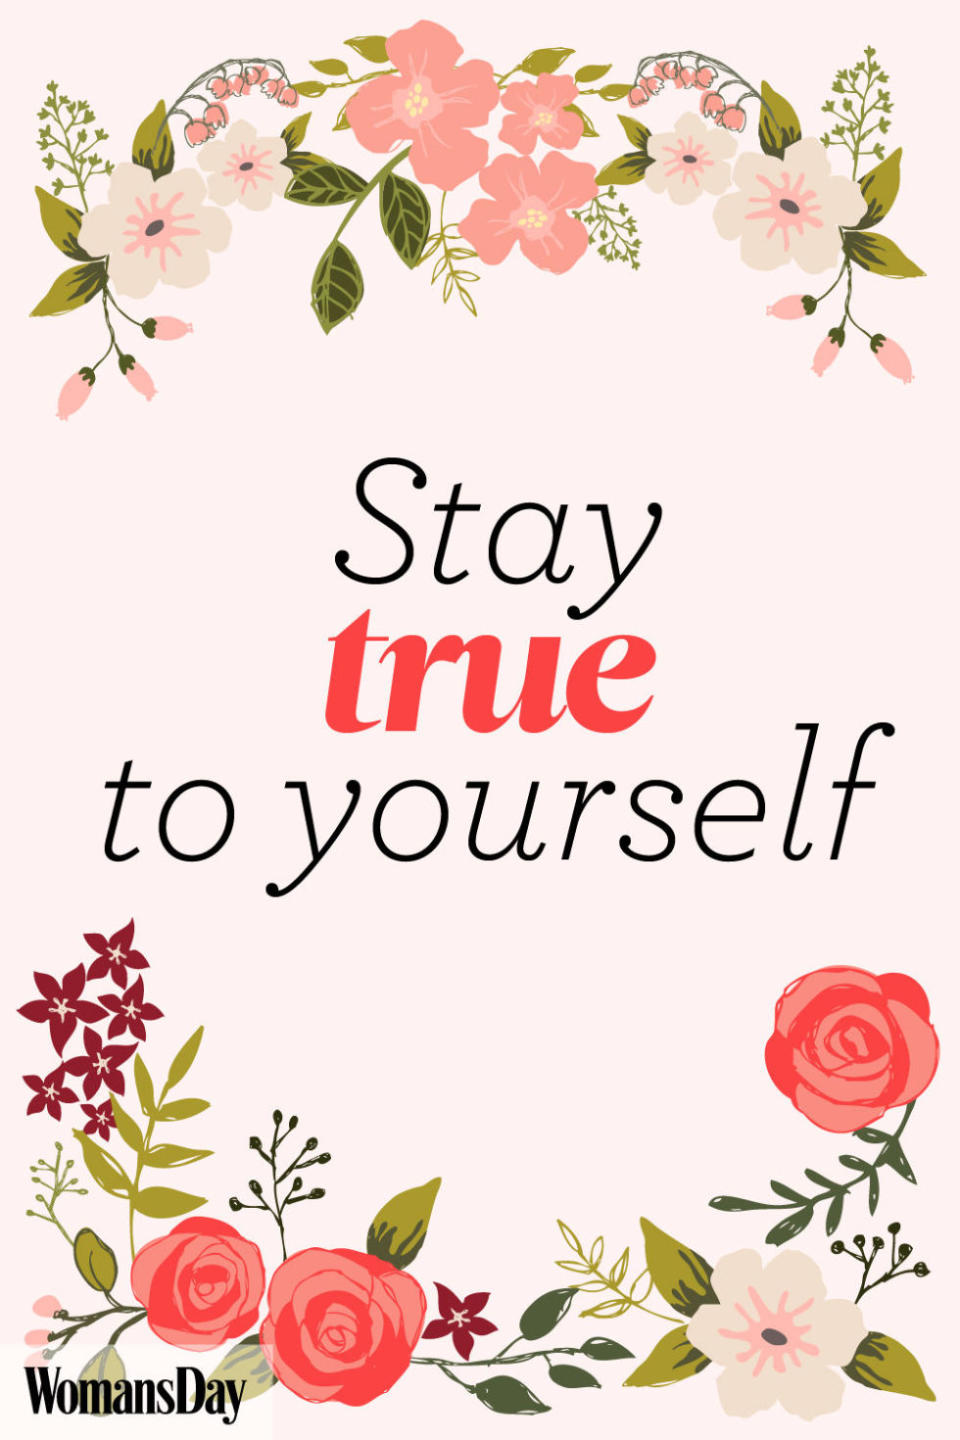 Stay true to yourself.